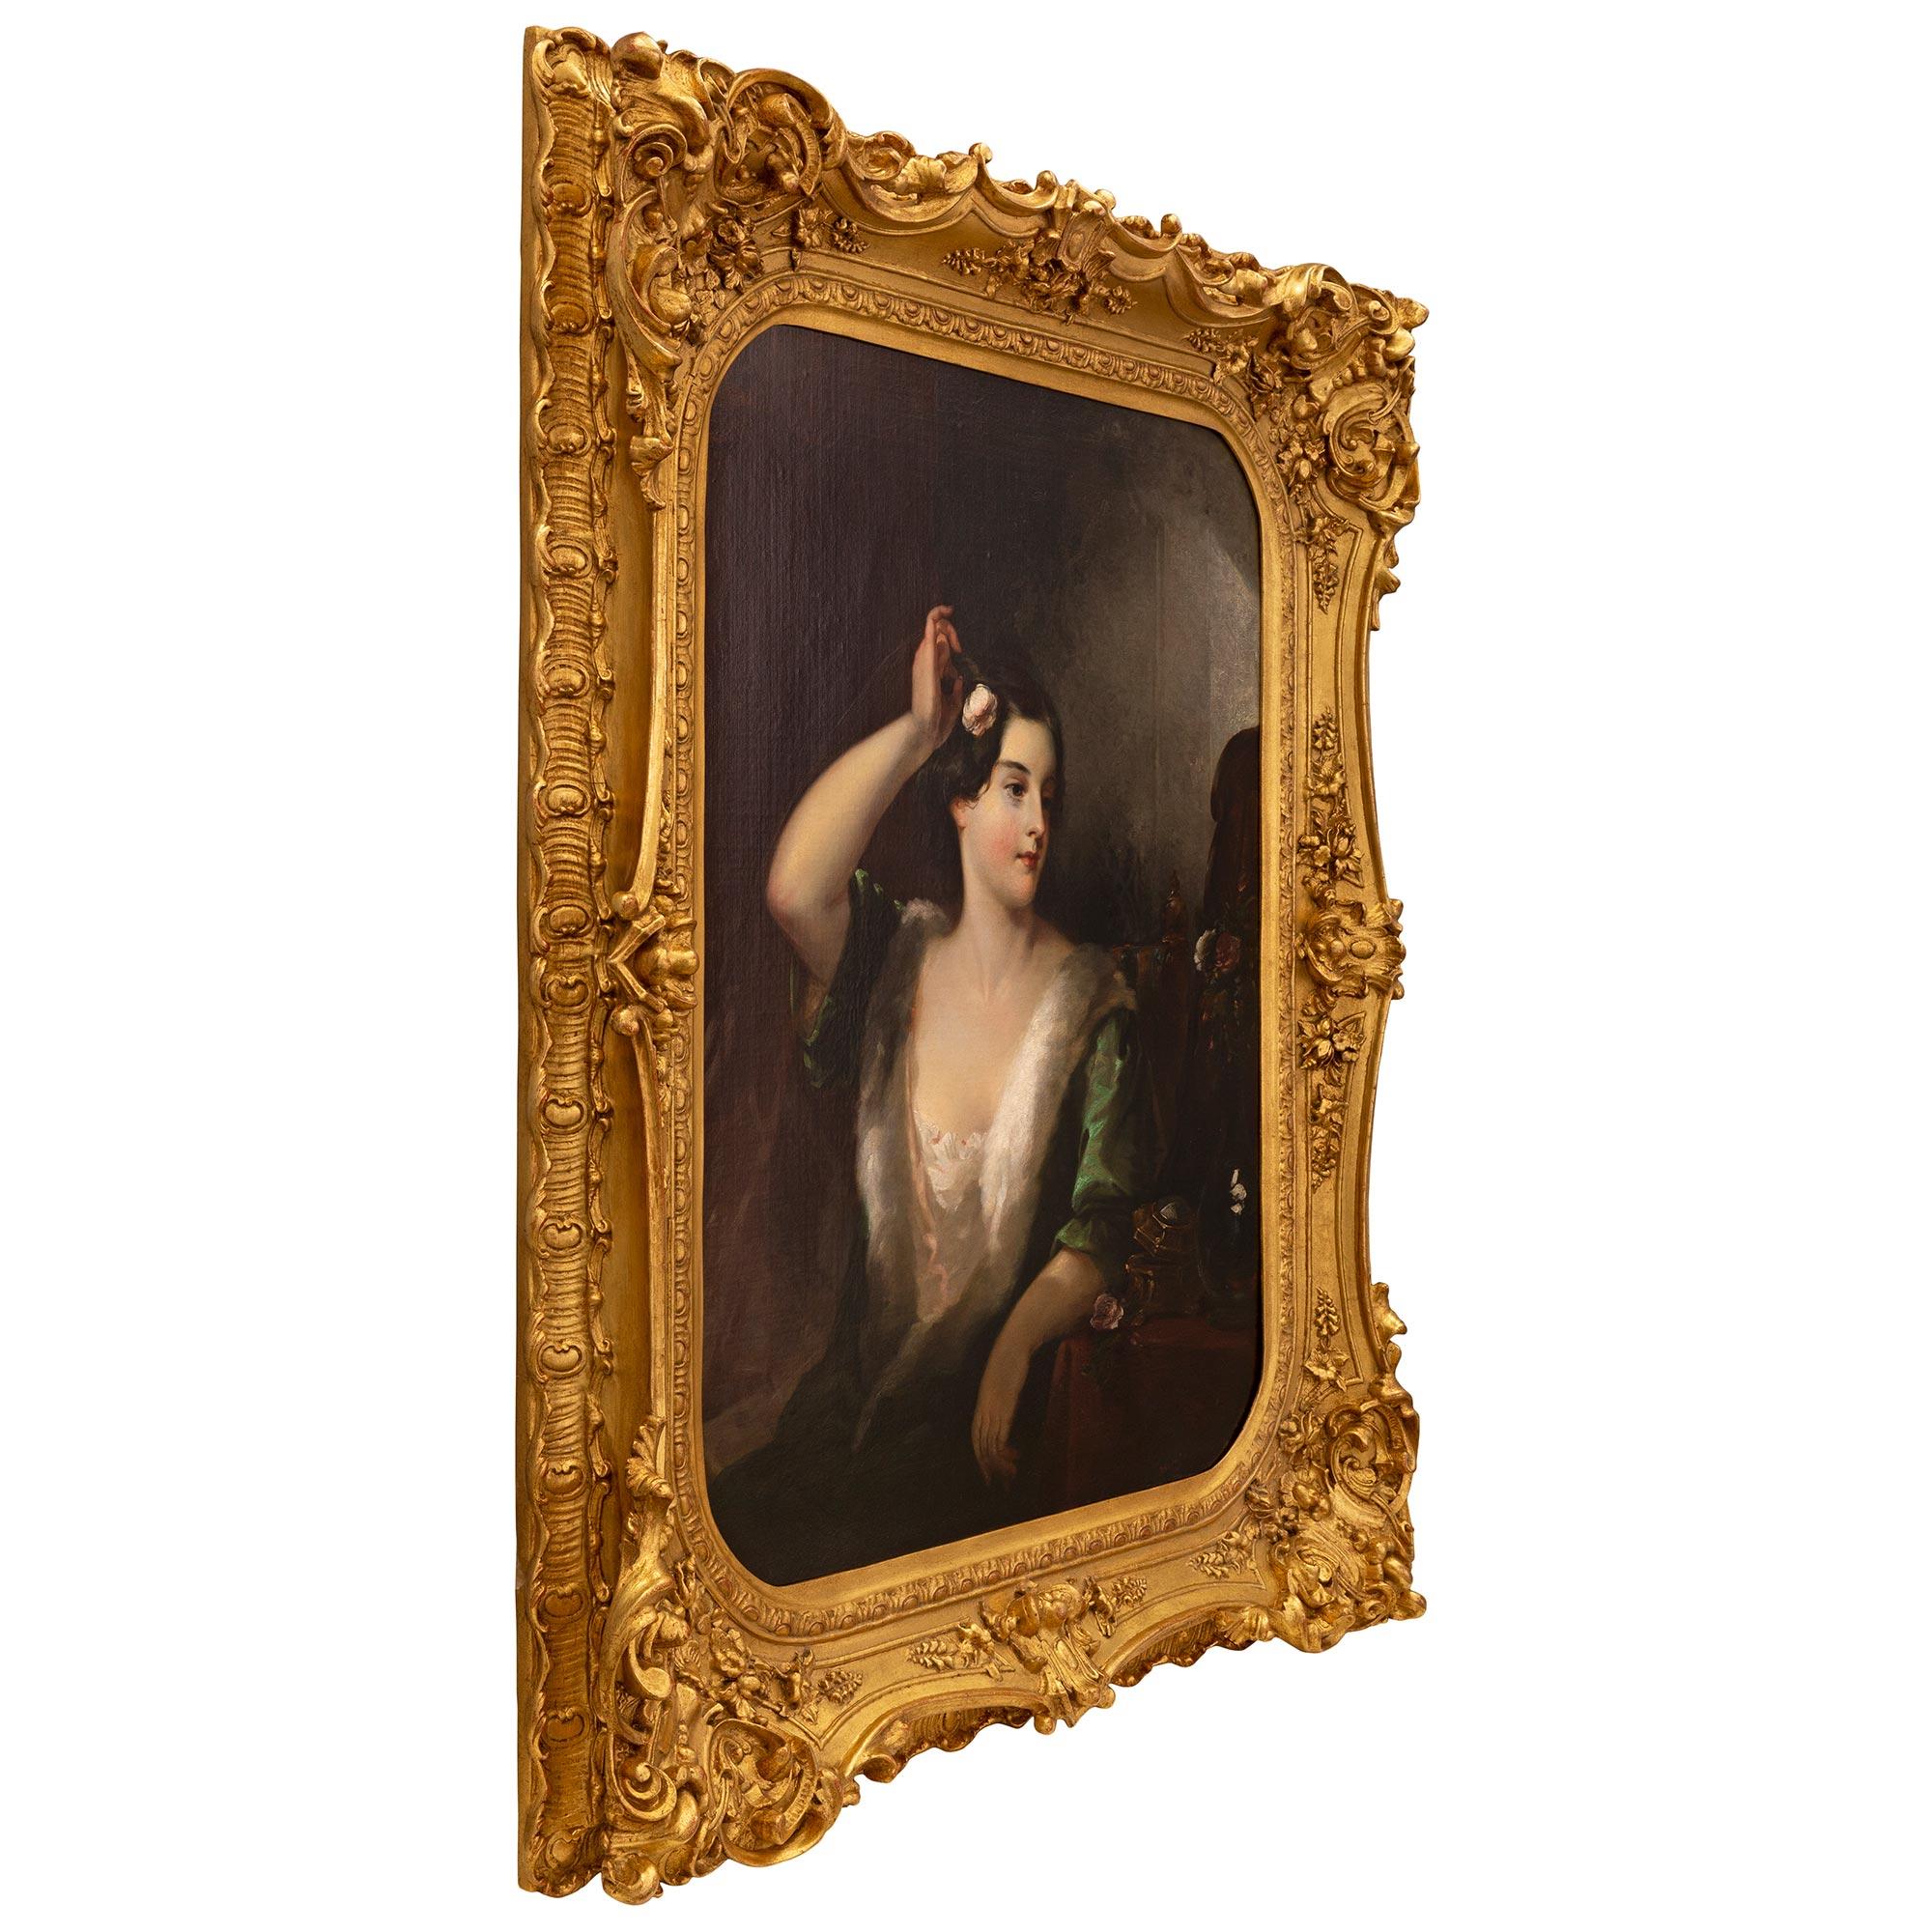 A superb and exceptionally high quality Continental 19th century oil on canvas painting in its original frame. The painting depicts a beautiful young lady dressed in an elegant gown with ermine trim. She is leaning on her dressing table where a